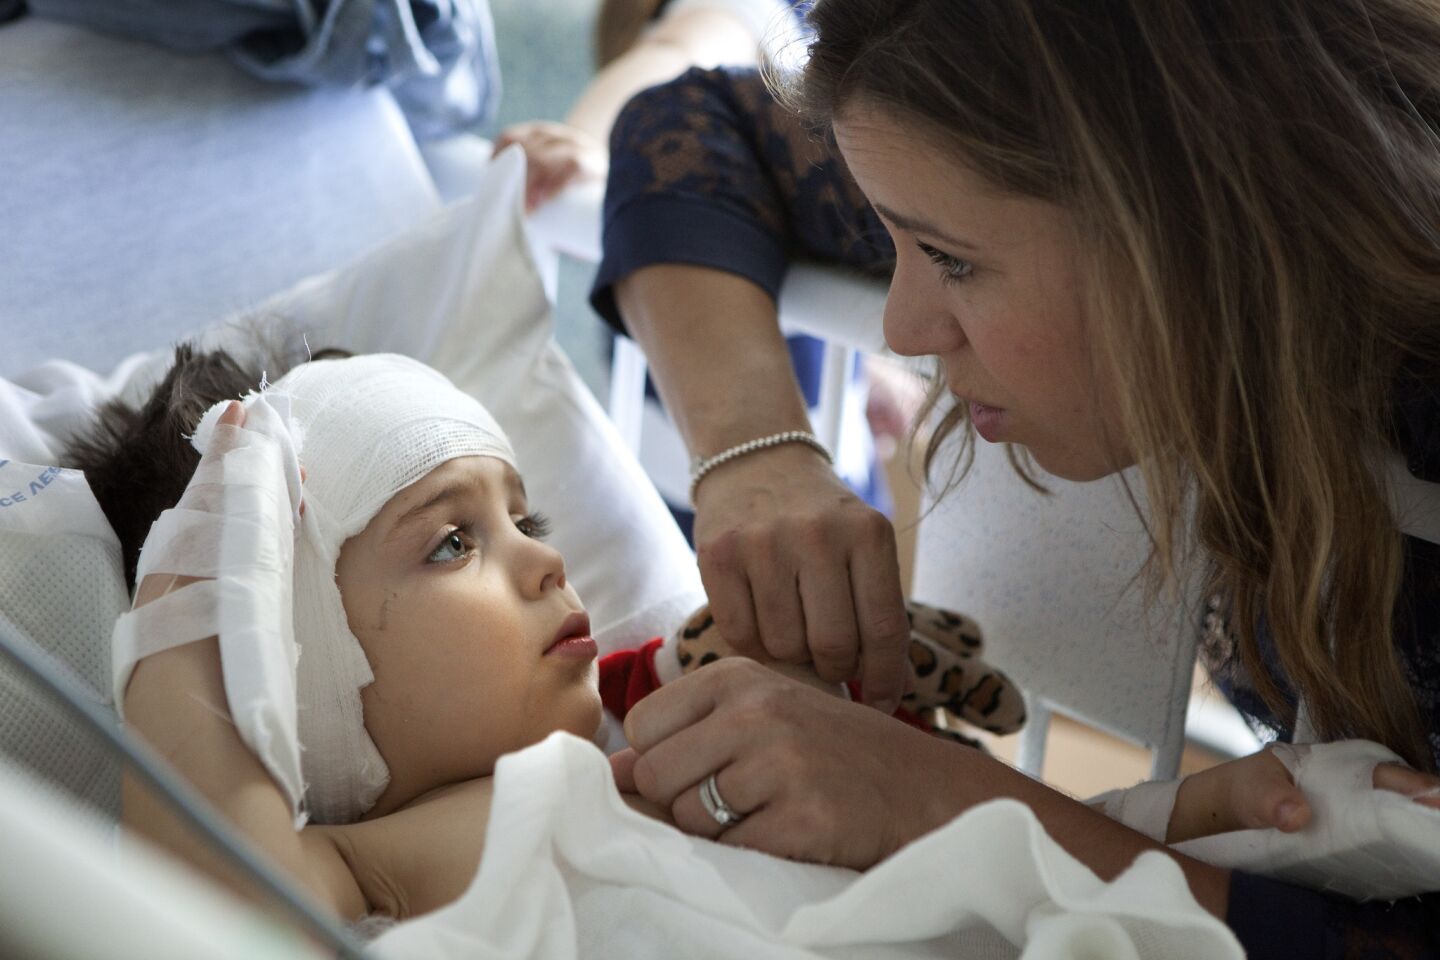 Sophie Gareau looks in on her son Auguste as the 3-year-old recovers after surgery at Children's Hospital Los Angeles.